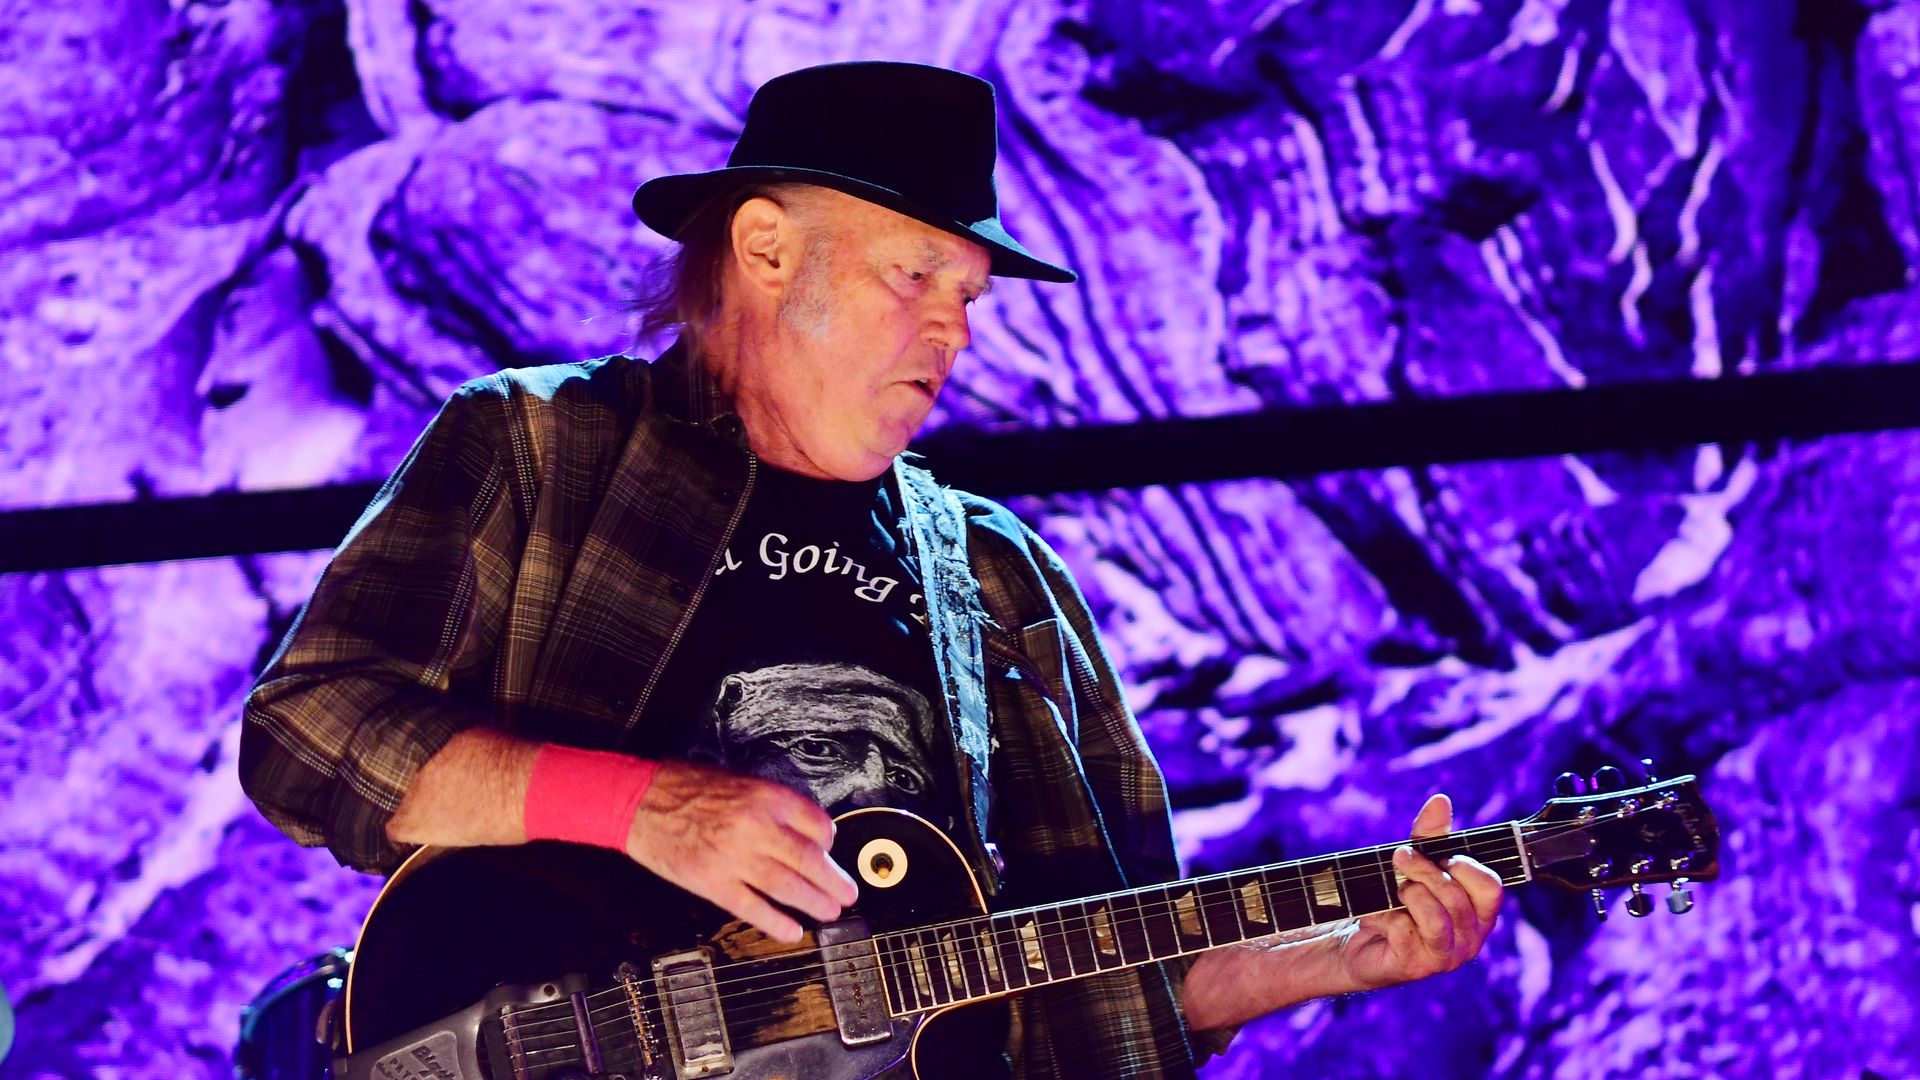 Neil Young performs during  2017 Farm Aid on September 16, 2017 in Burgettstown, Pennsylvania.